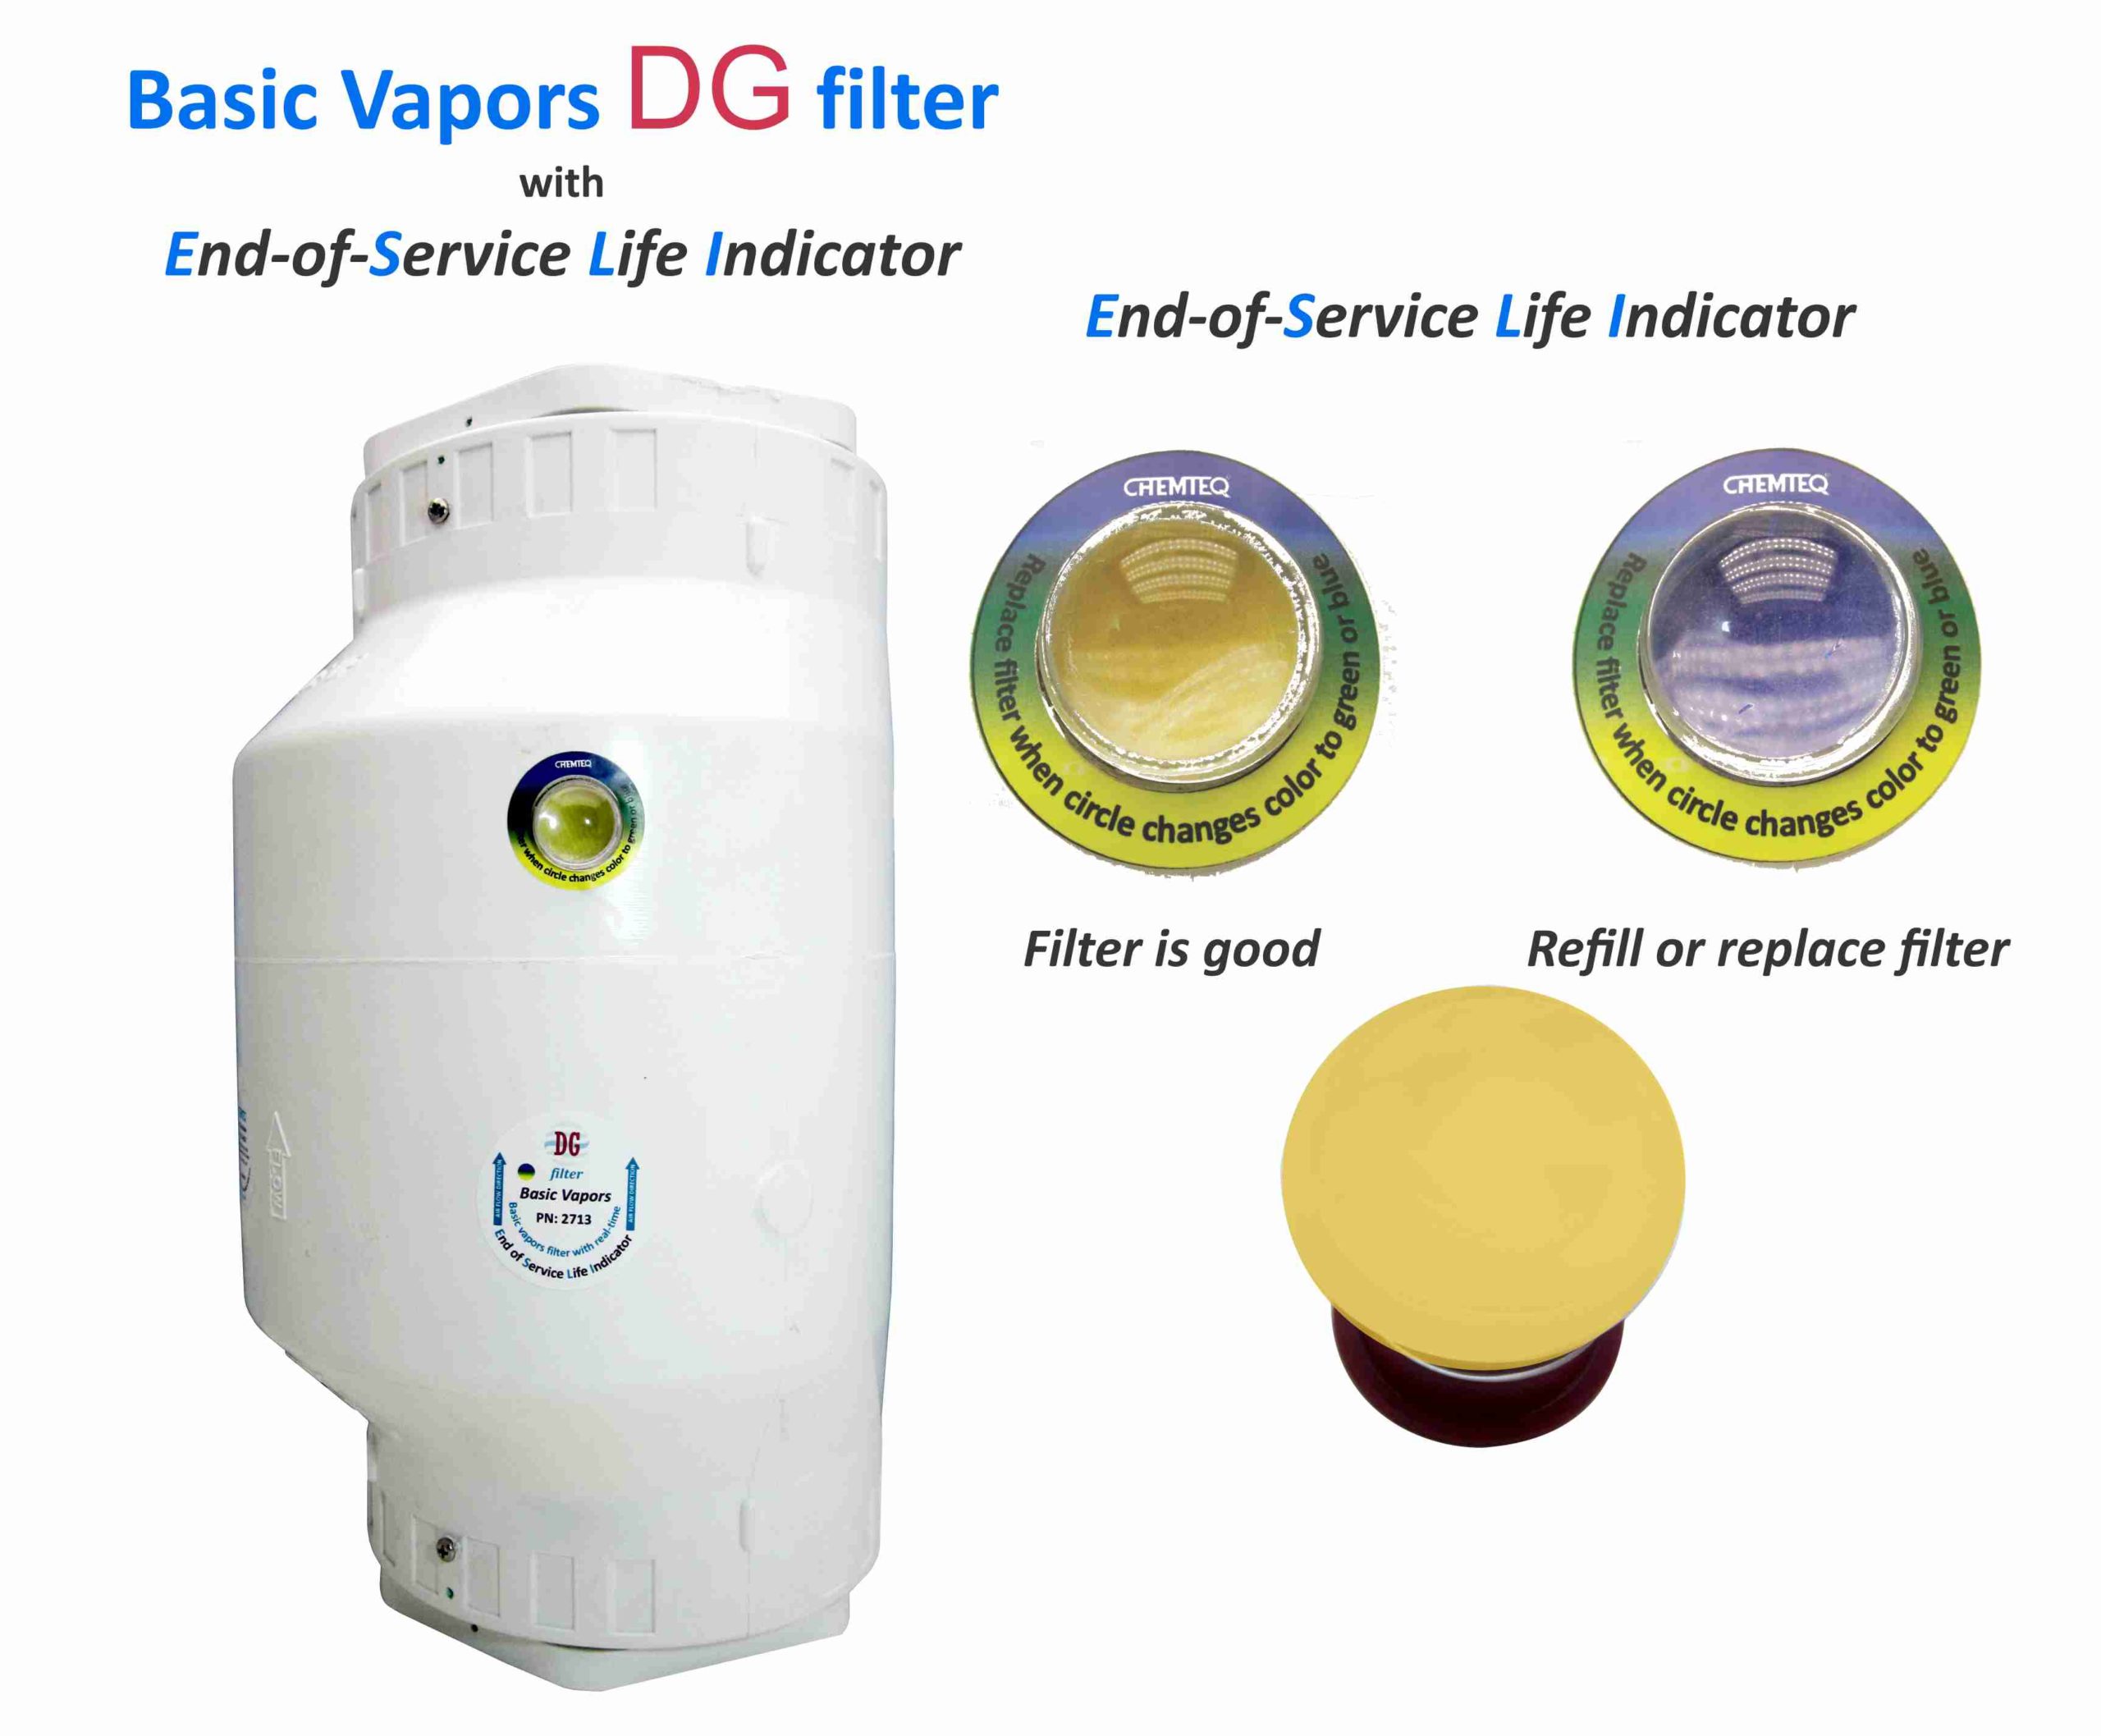 Basic Vapors DG FILTER-ESLI-2713. Basic vapors filter with end-of-service life indicator suitable Chemical Processes and Reactors Vents